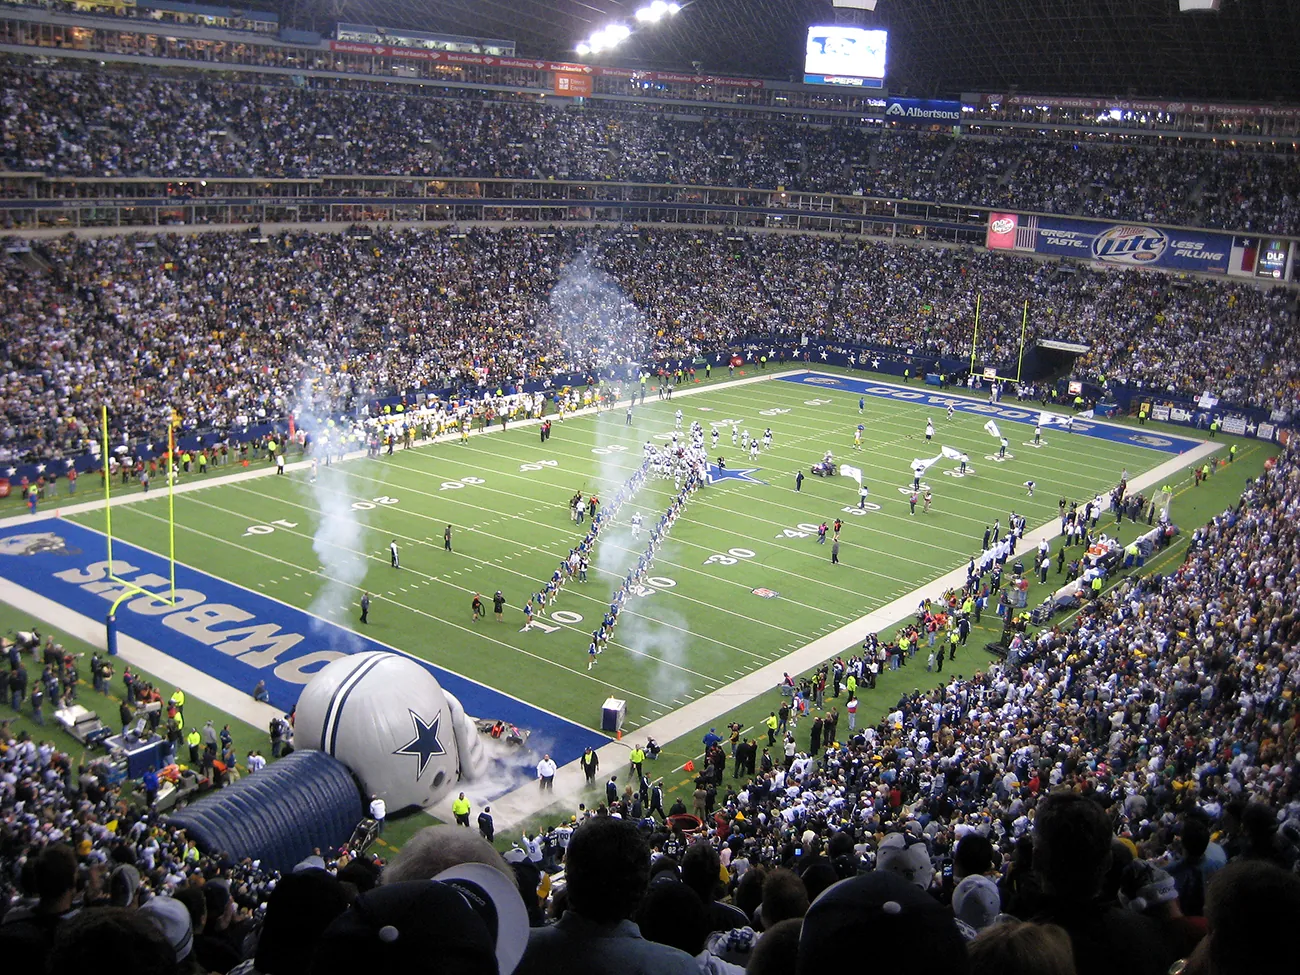 A photograph shows the inside of the stadium during a Dallas Cowboys football game.